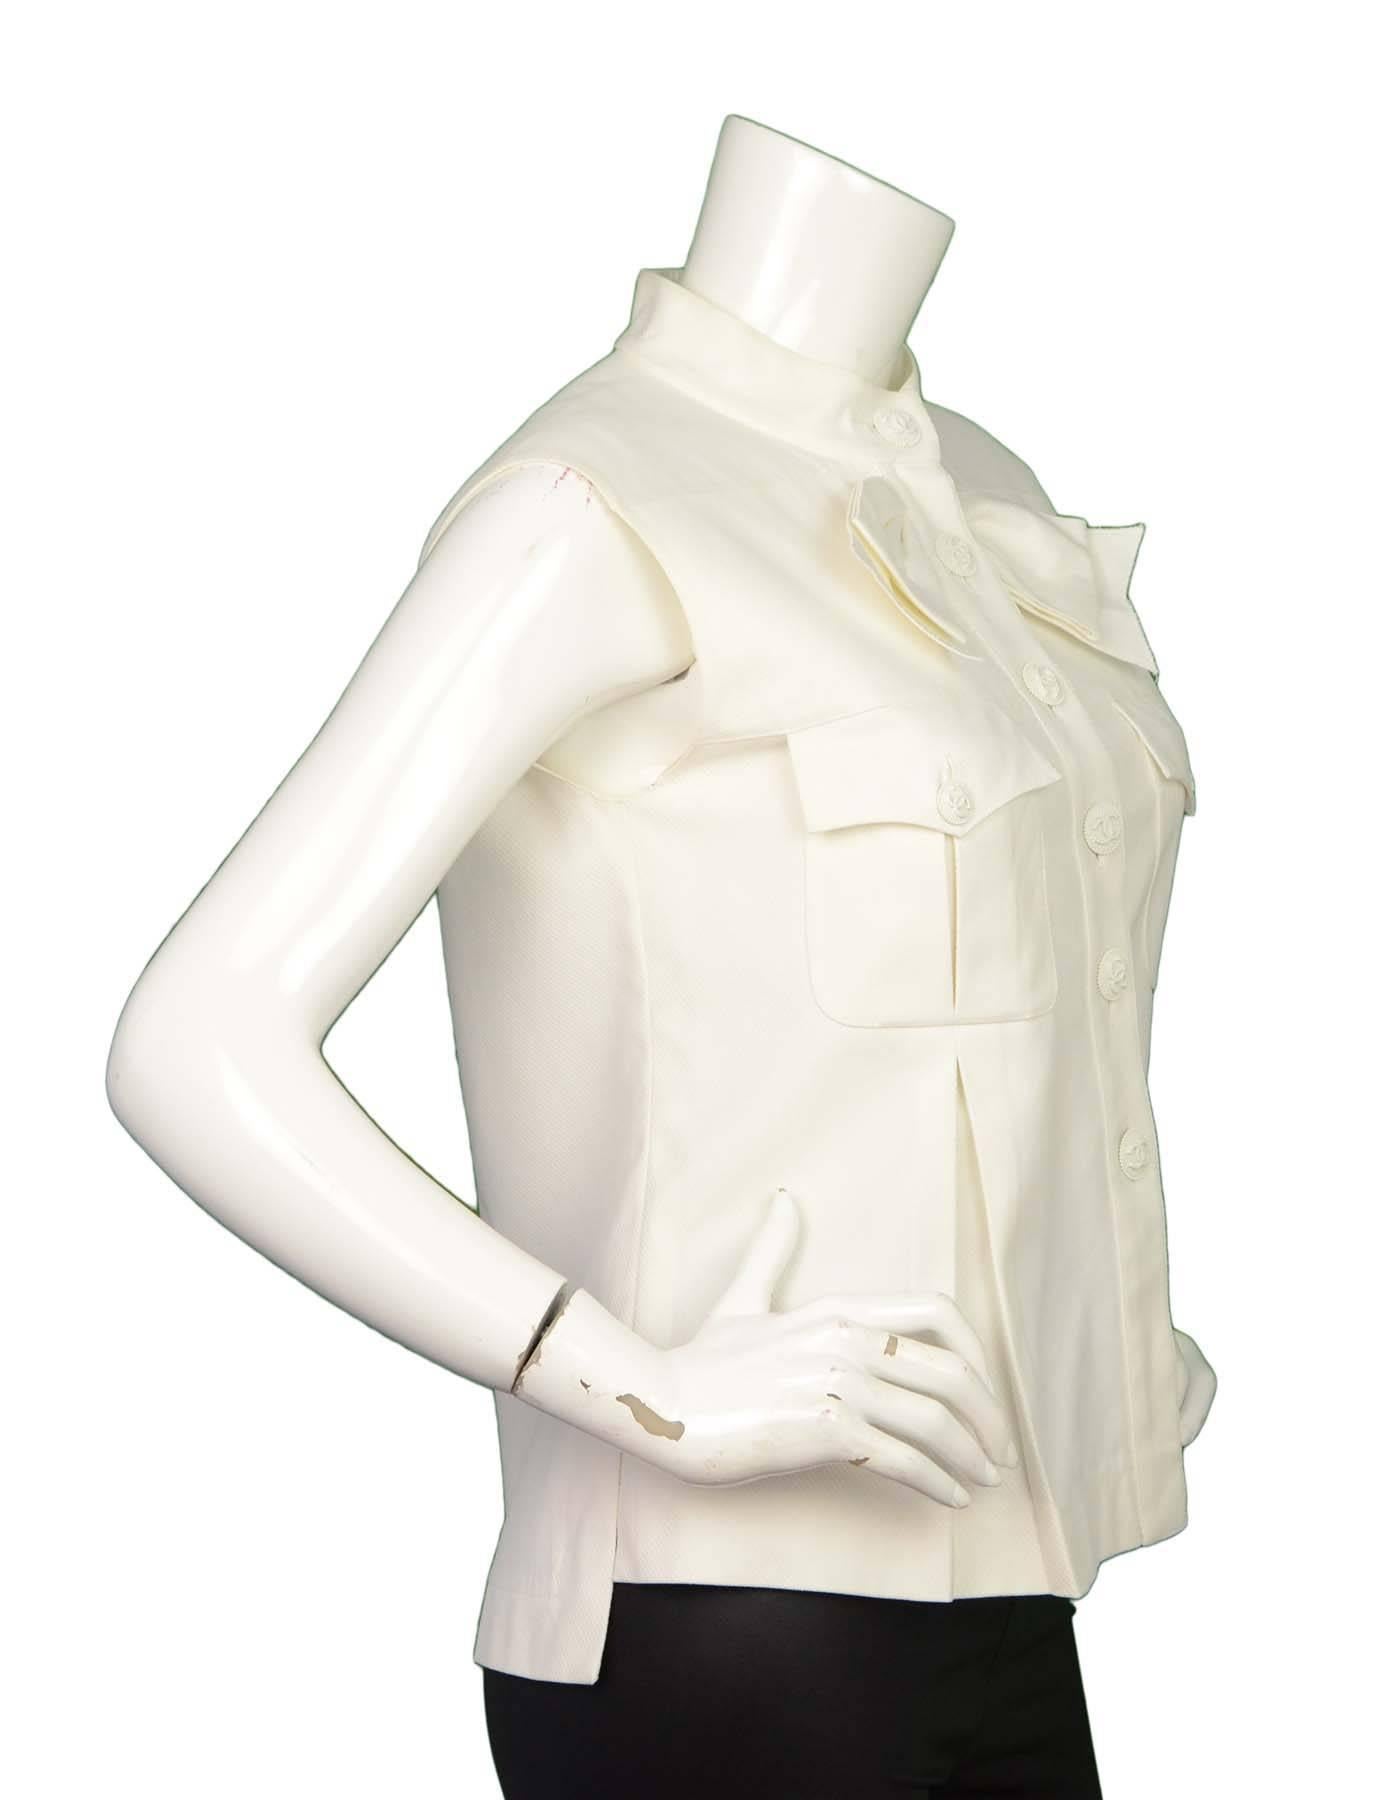 Chanel White Button-Up Top with Bow Sz 42

Features over sized fit and bow detail at neck

Made In: France
Year Of Production: 2009
Color: White
Composition: 97% Cotton, 3% Spandex
Lining: White textile
Exterior Pockets: Two front pockets